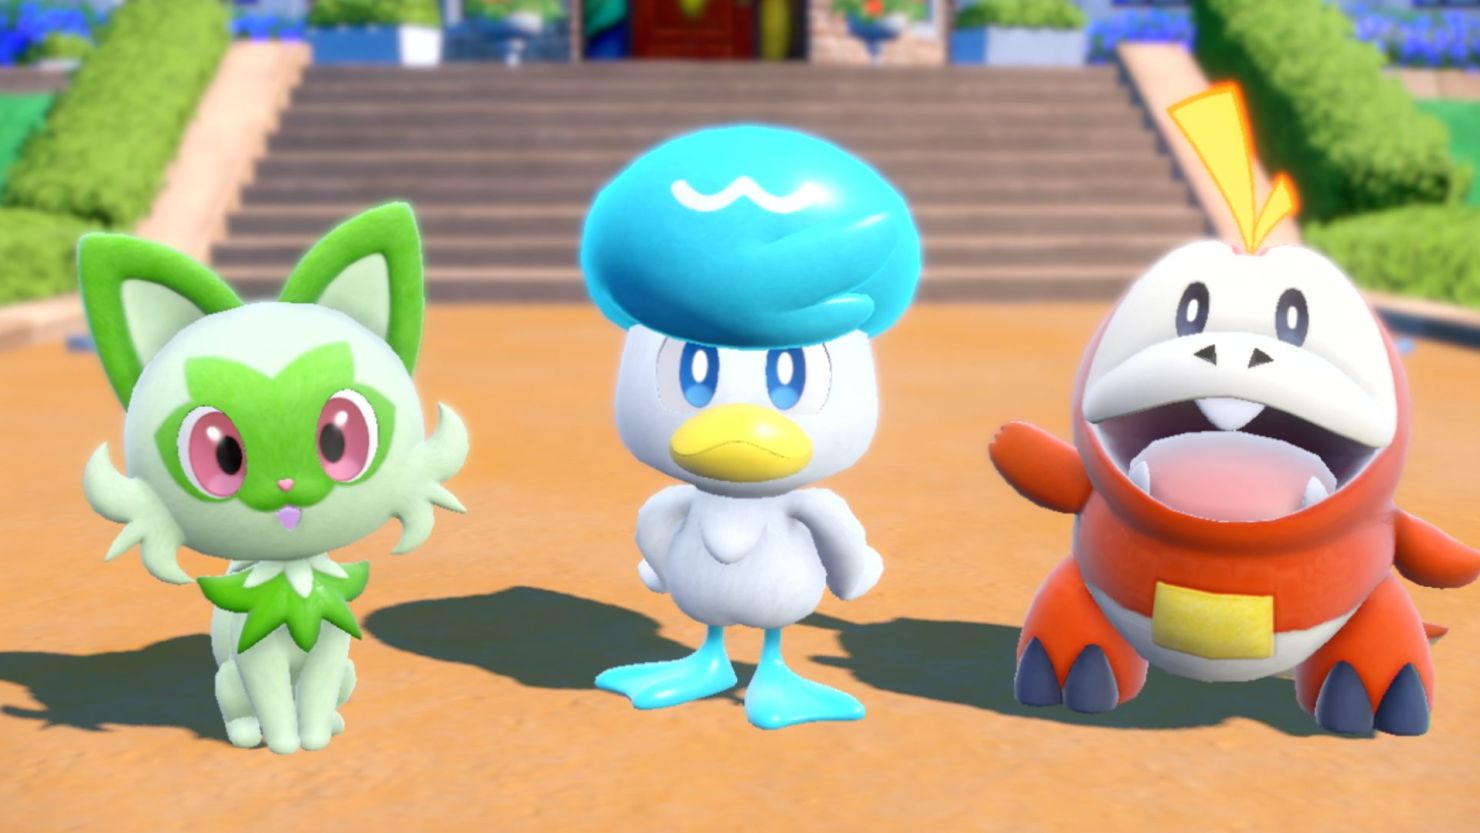 Pokemon Sword and Shield Version Exclusive Trainers and Pokemon Confirmed